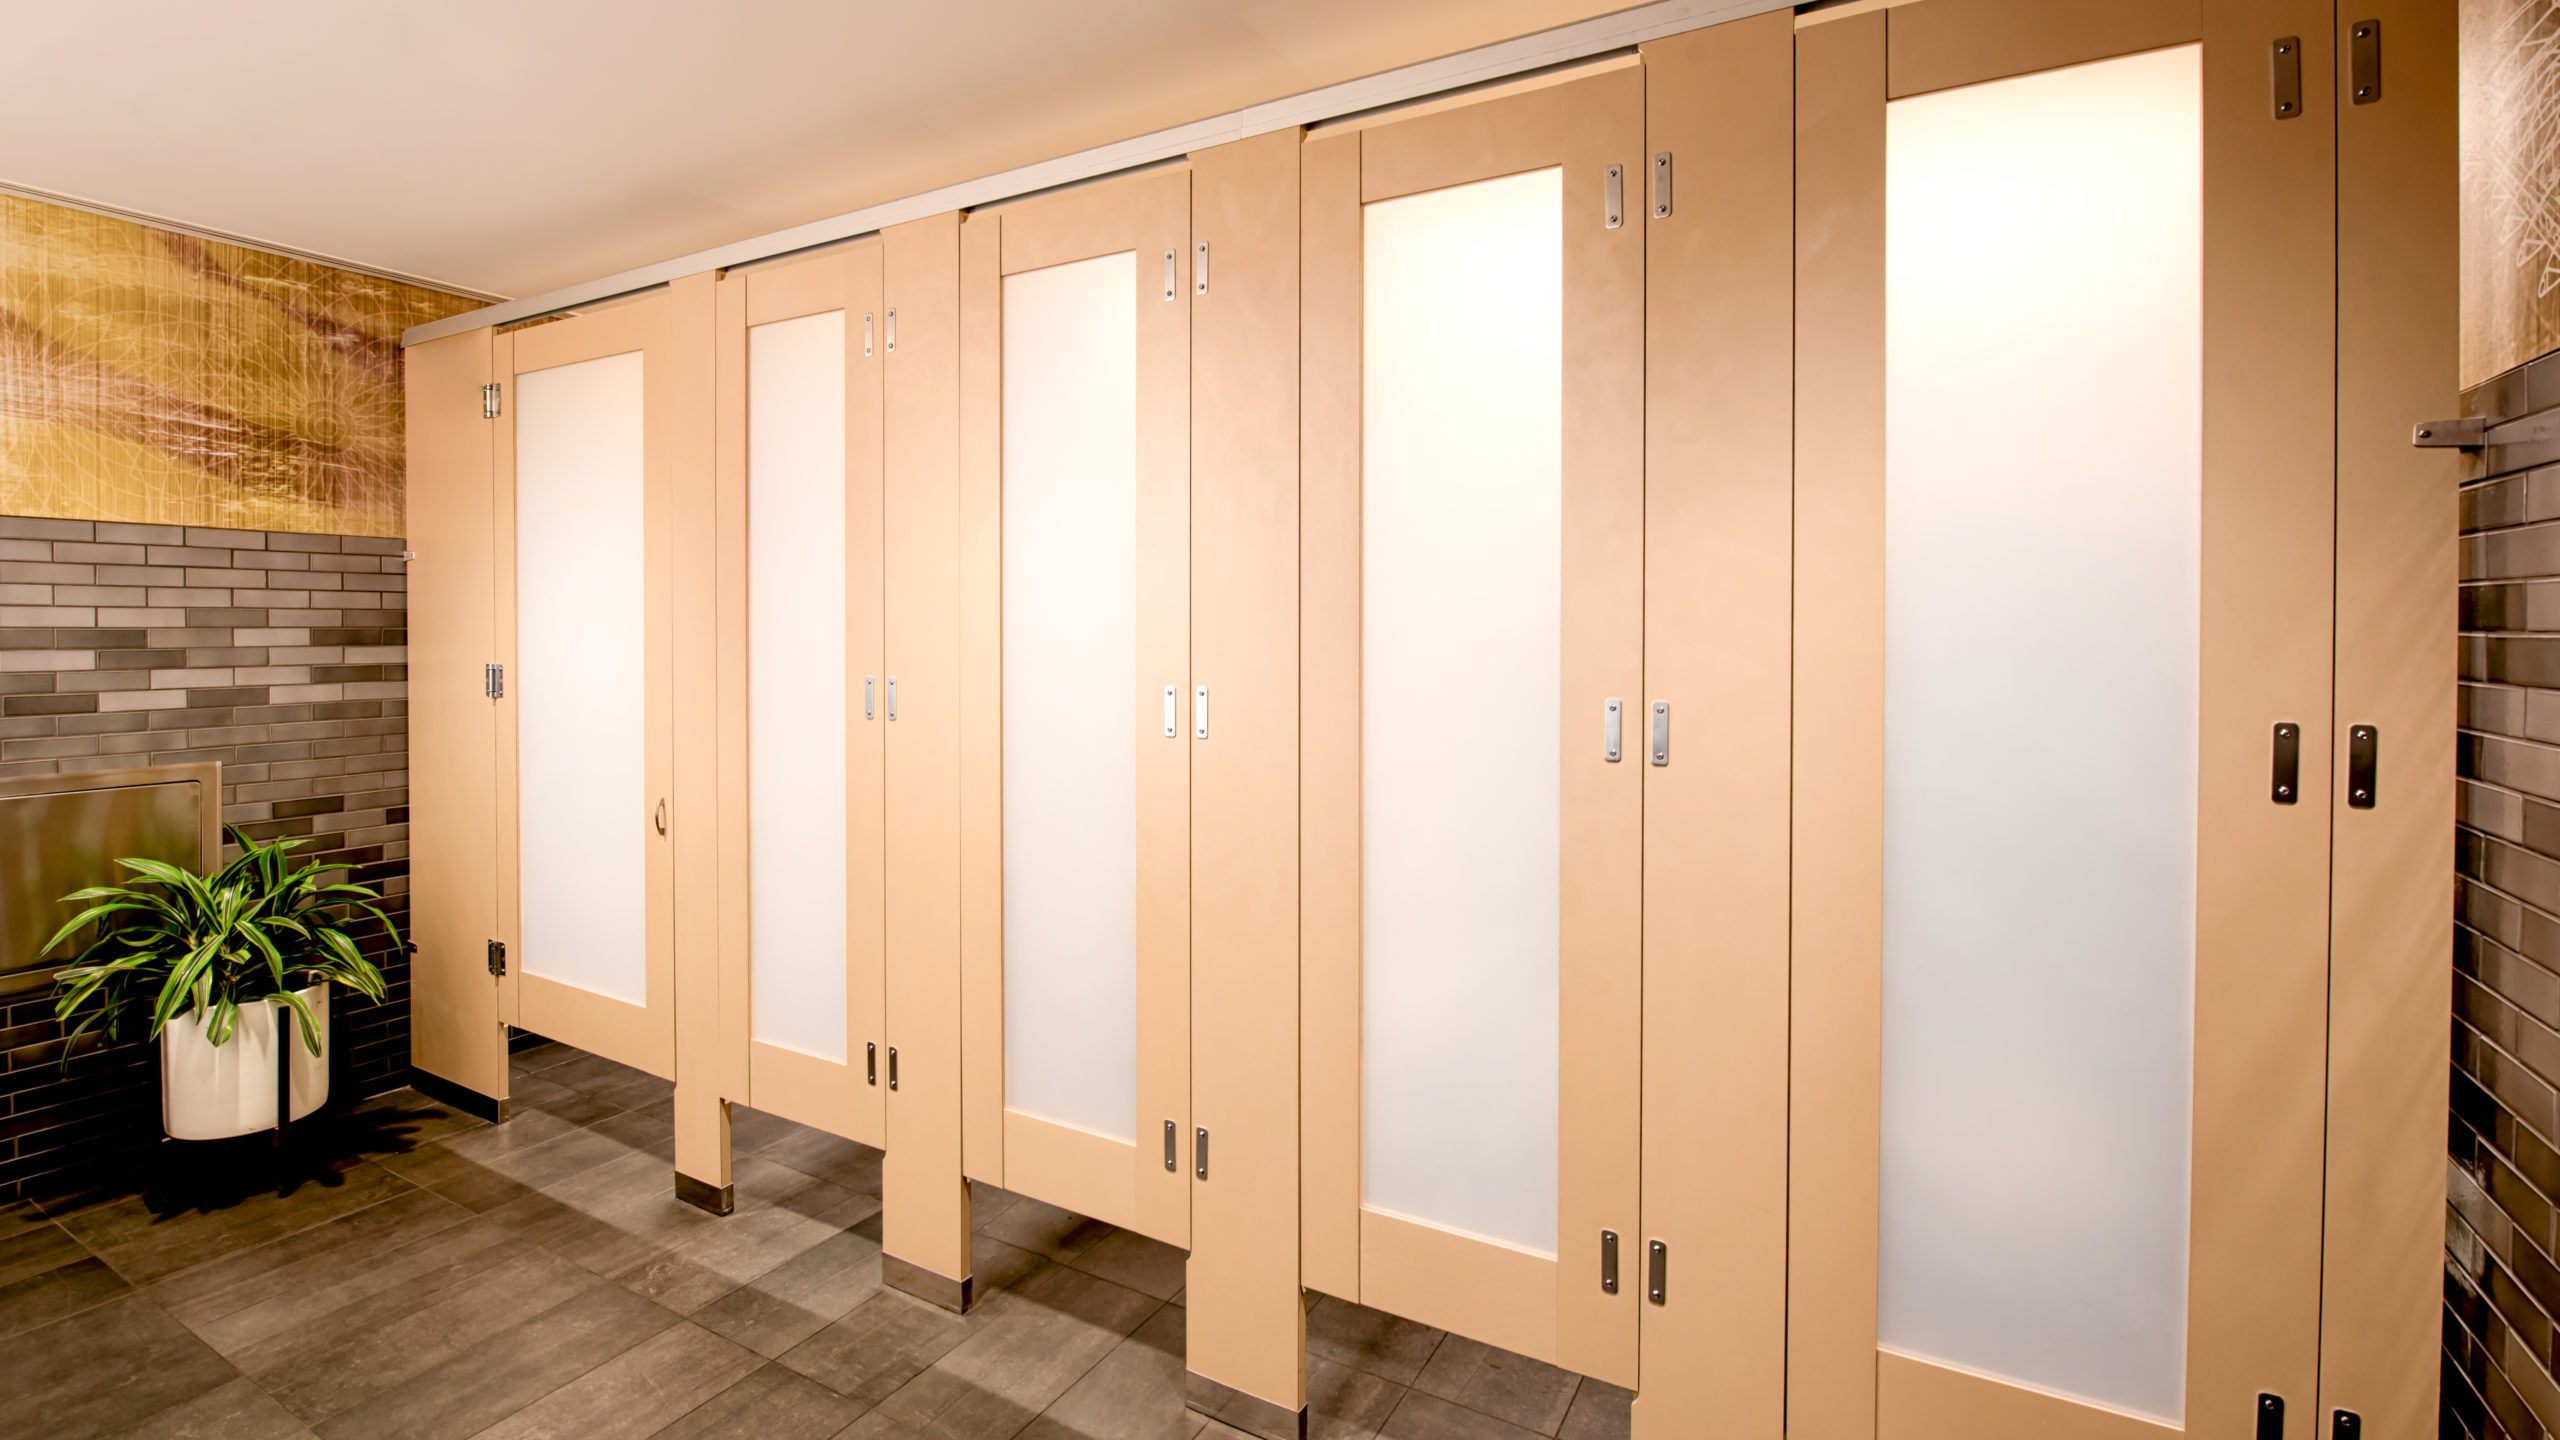 High privacy french vanilla plastic laminate bathroom partitions with luminous frosted acrylic door lite insert features zero sightline upgrade.